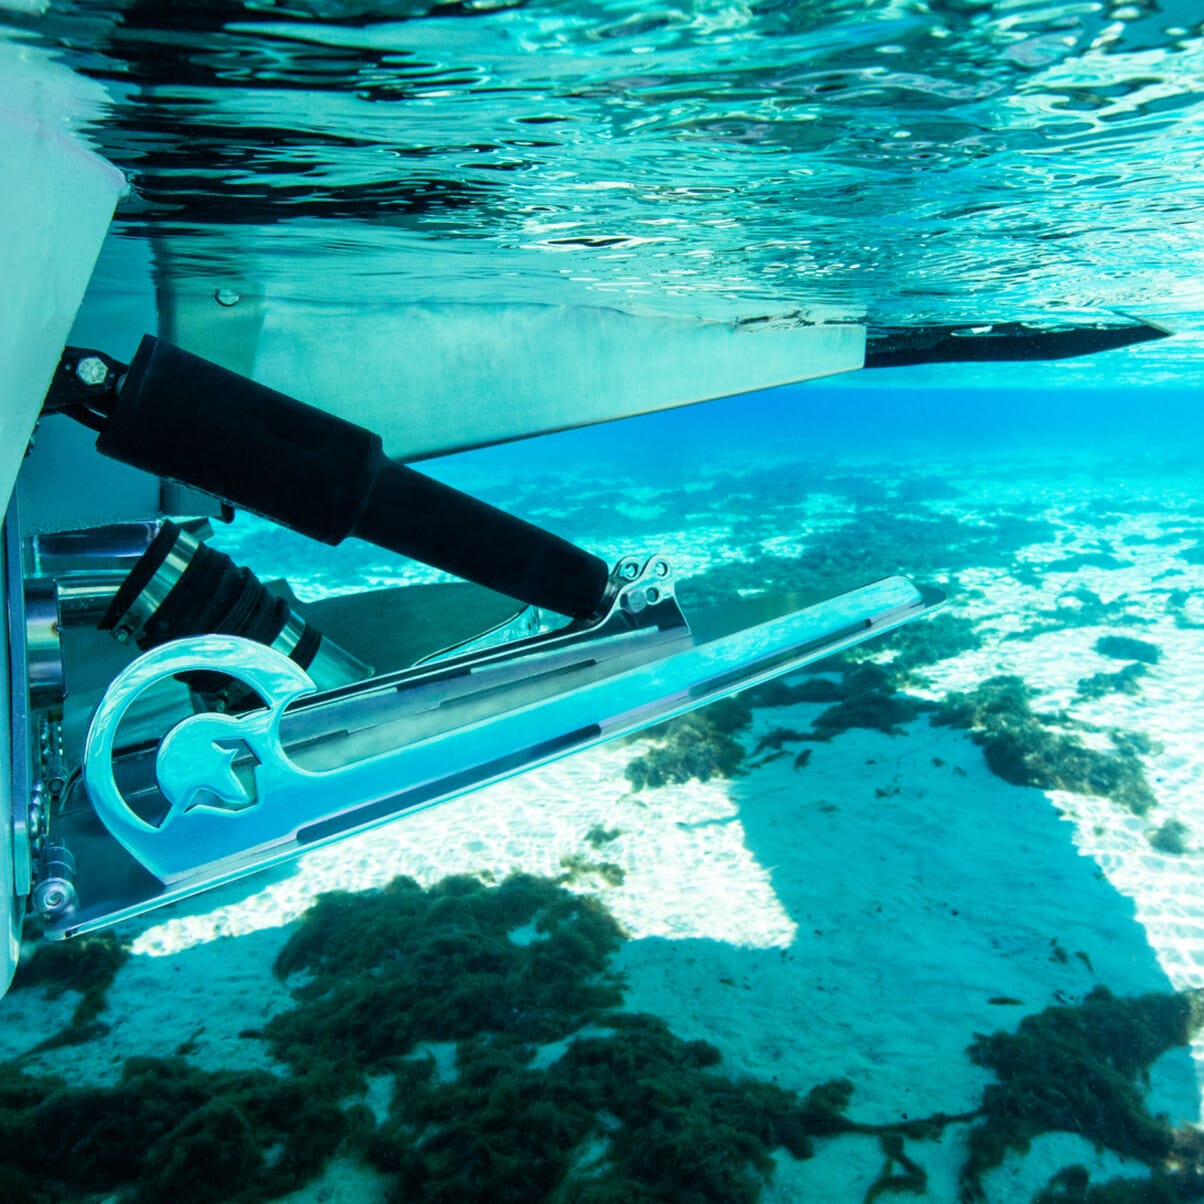 Underwater view of a boat's rudder system and propeller in clear, blue water, with the sea floor and some aquatic plants visible in the background.